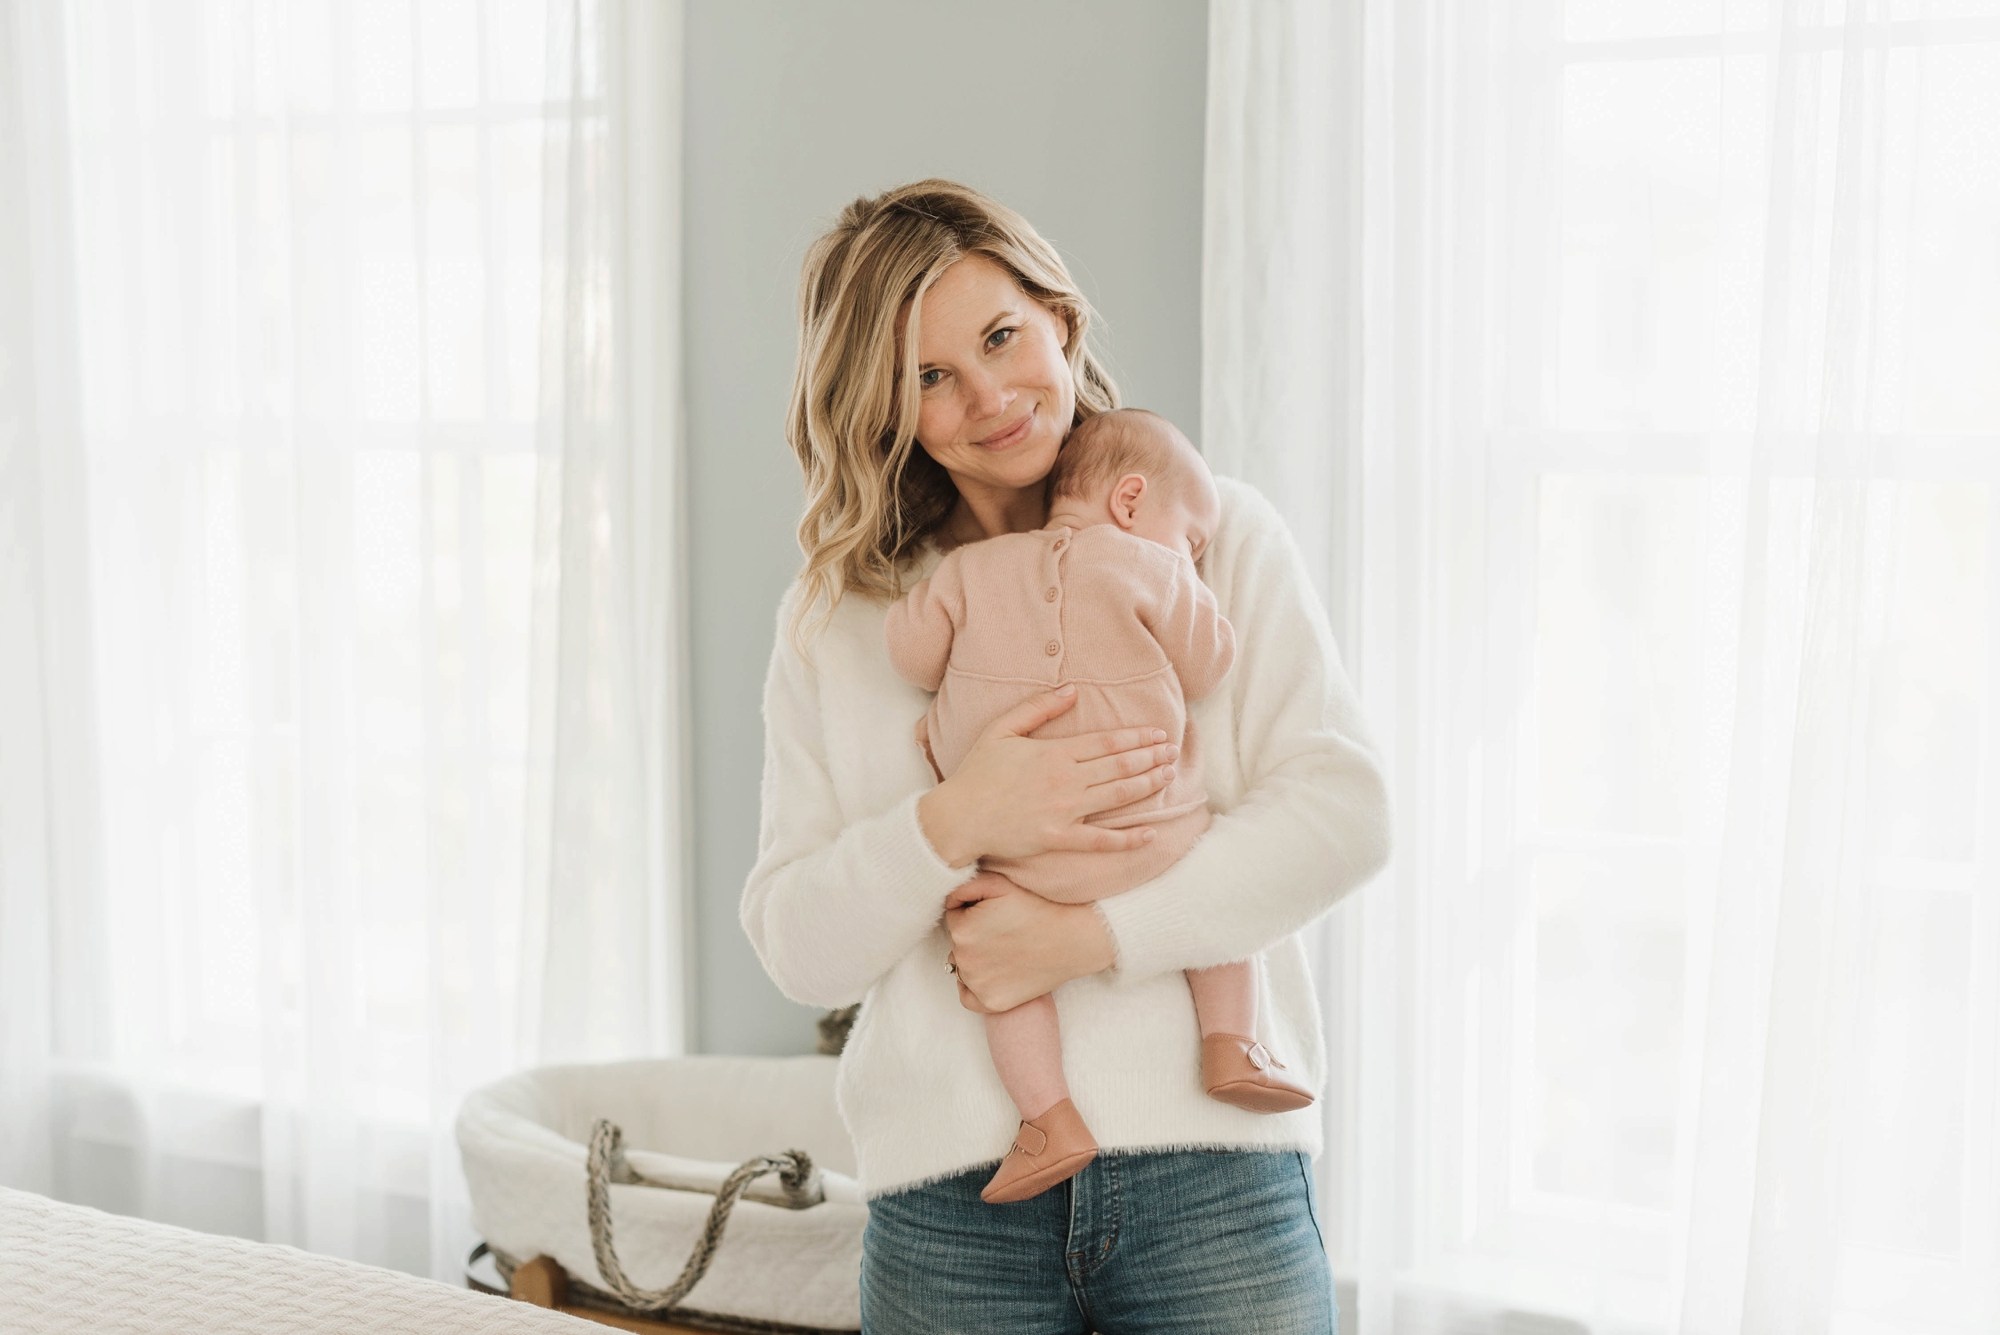 This lifestyle newborn session features rich neutral tones & intimate family & motherhood photos photographed by Boston Newborn Photographer Annmarie Swift